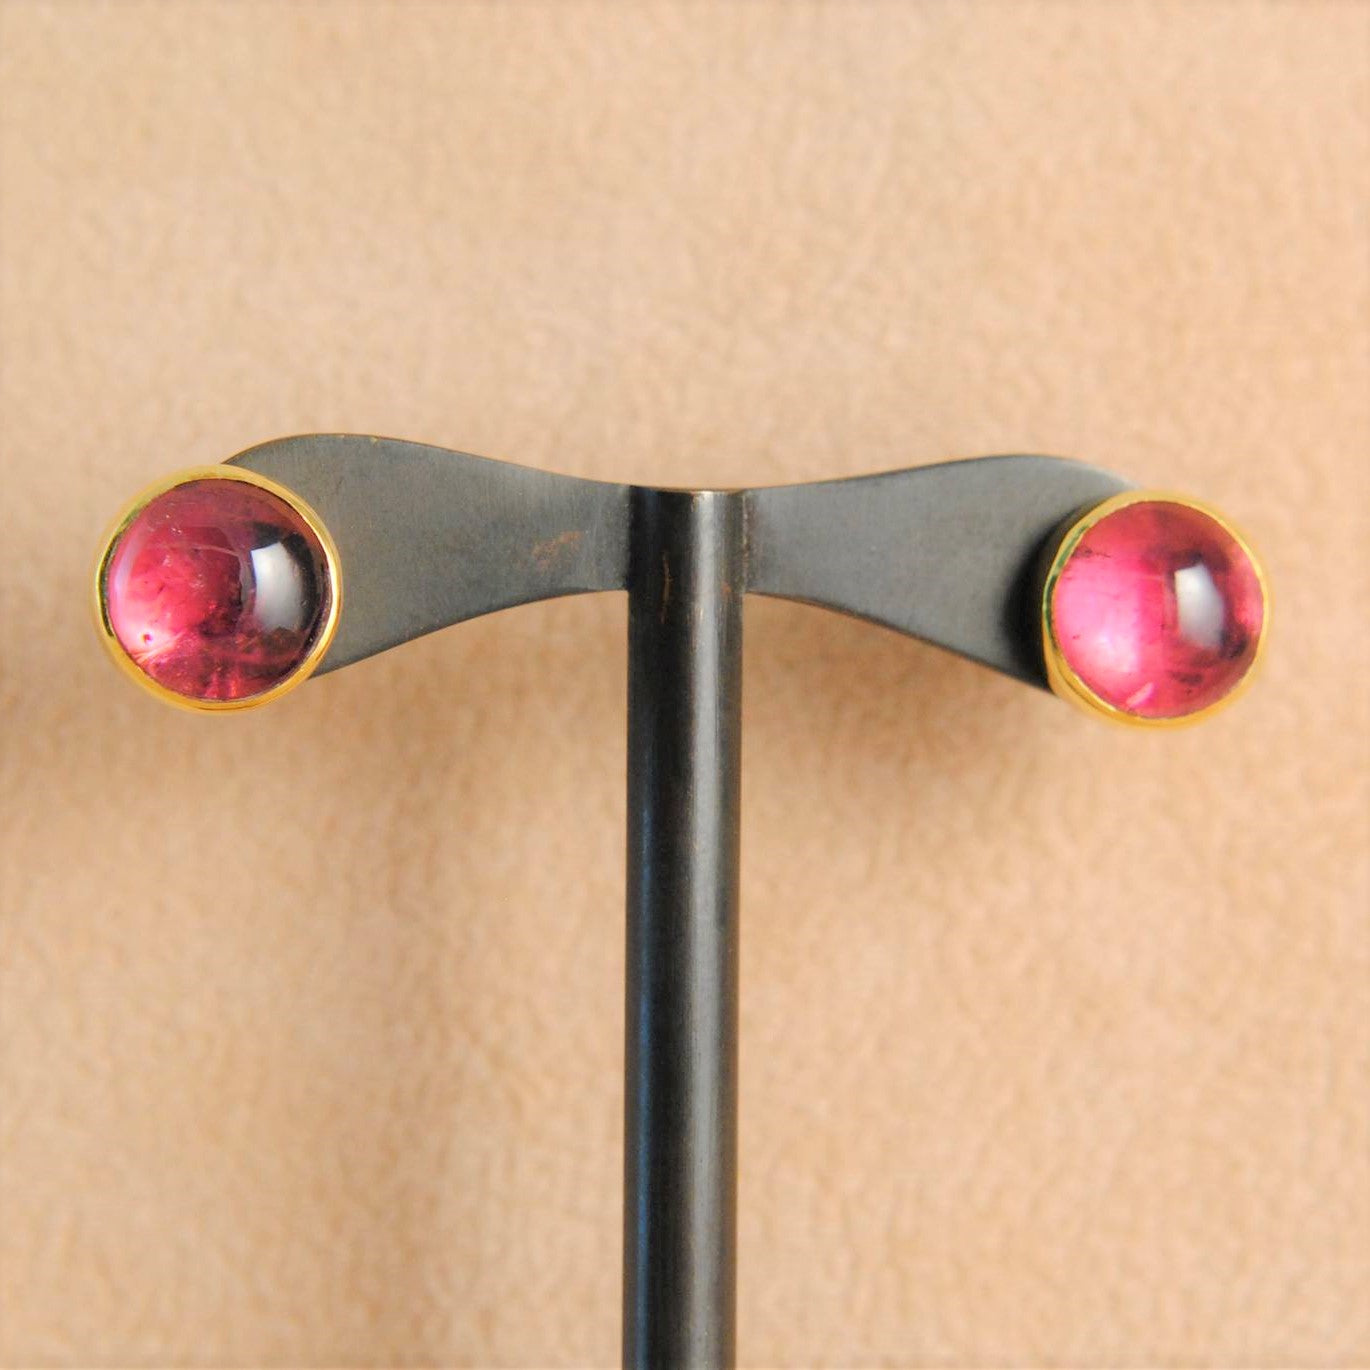 18K gold earrings with pink tourmalines